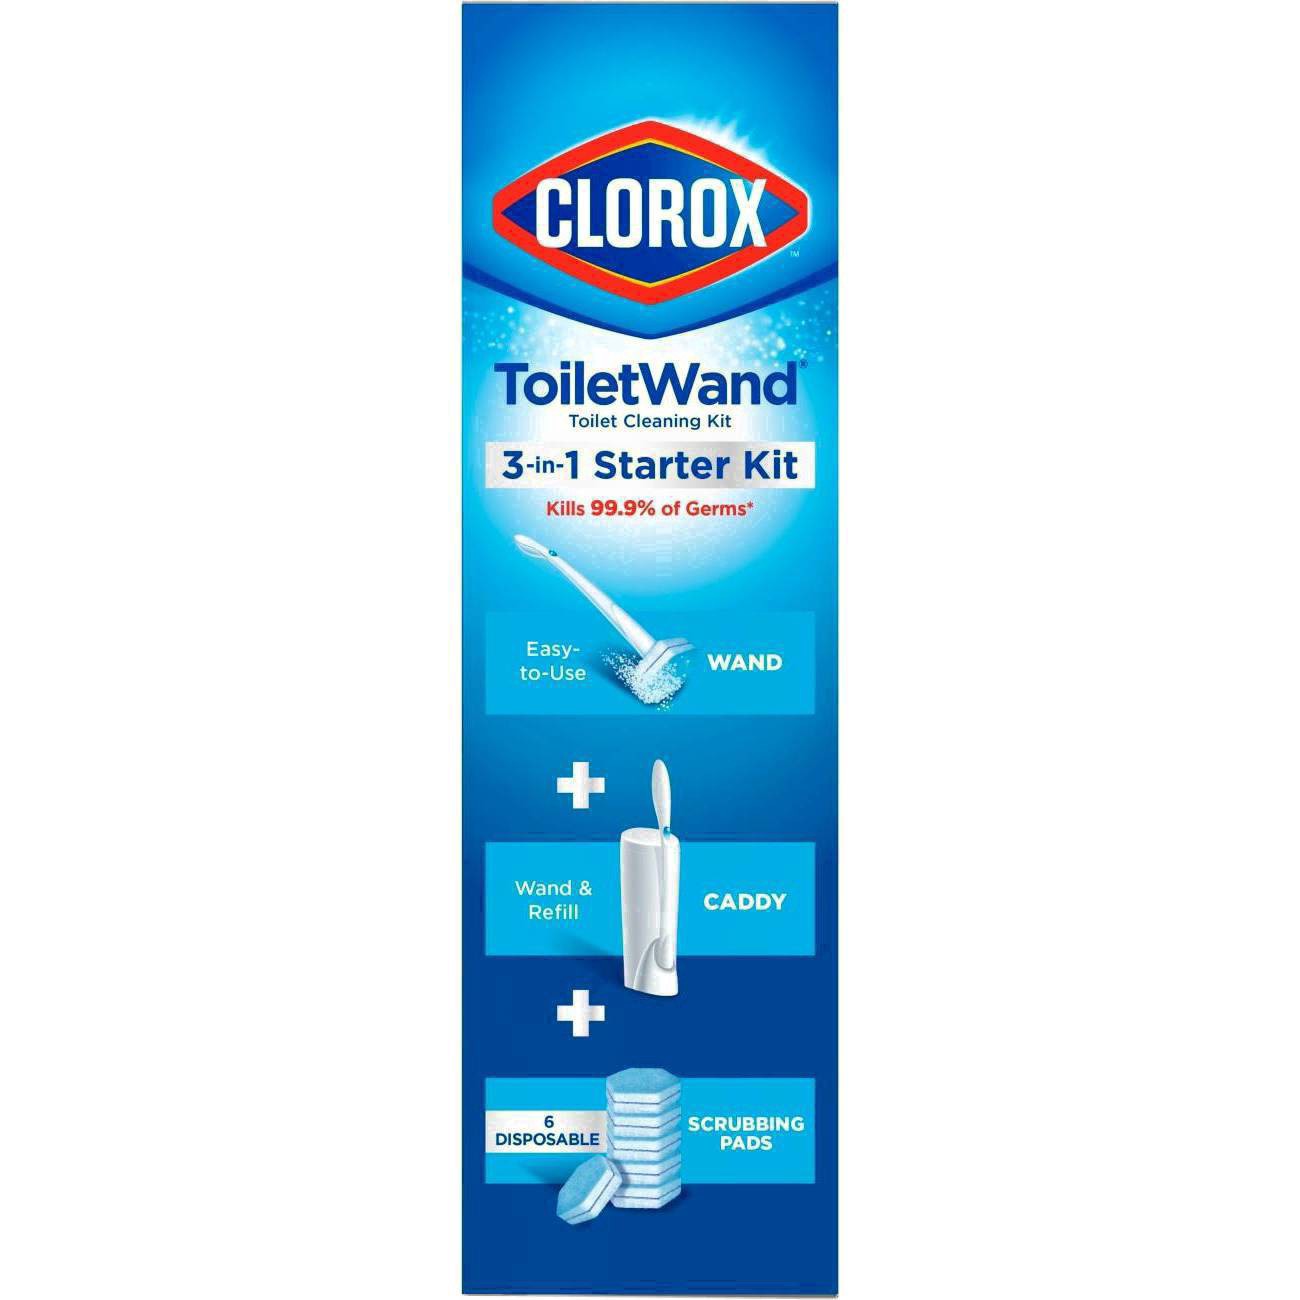 slide 126 of 176, Clorox Toilet Wand 3-in-1 Starter Toliet Cleaning Kit, 1 ct